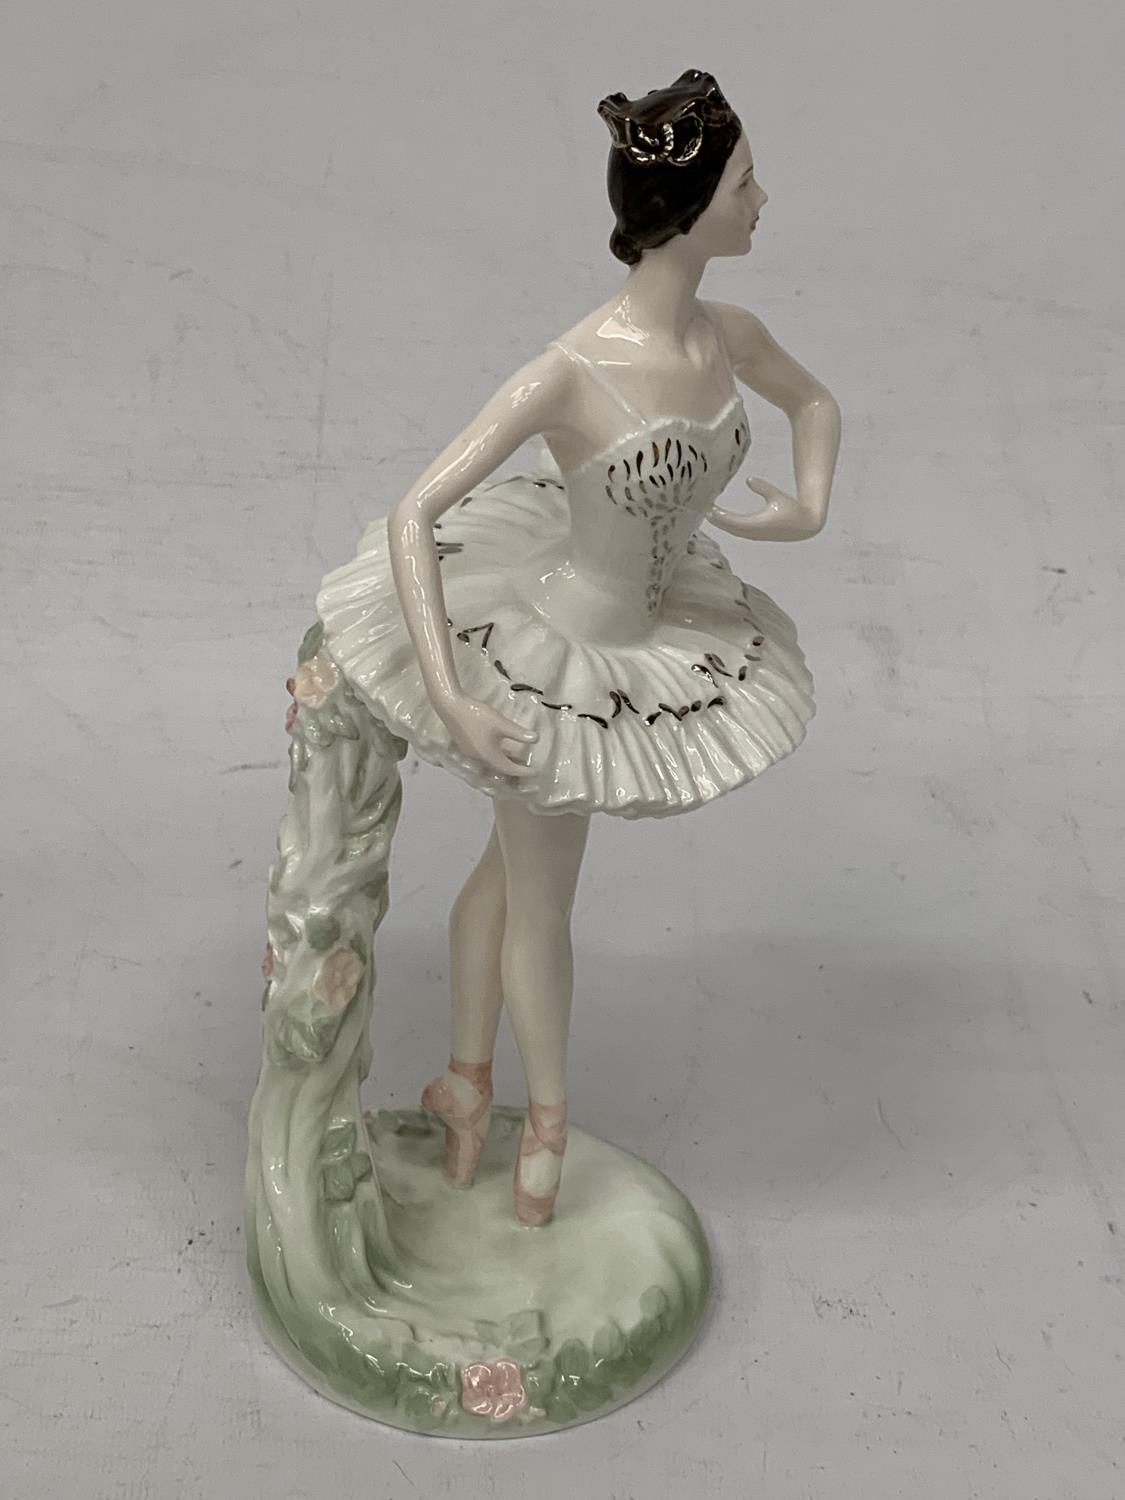 A COALPORT FIGURINE "DAME BERYL GREY" FROM THE ROYAL ACADEMY OF DANCING COLLECTION CELEBRATING THE - Image 4 of 5